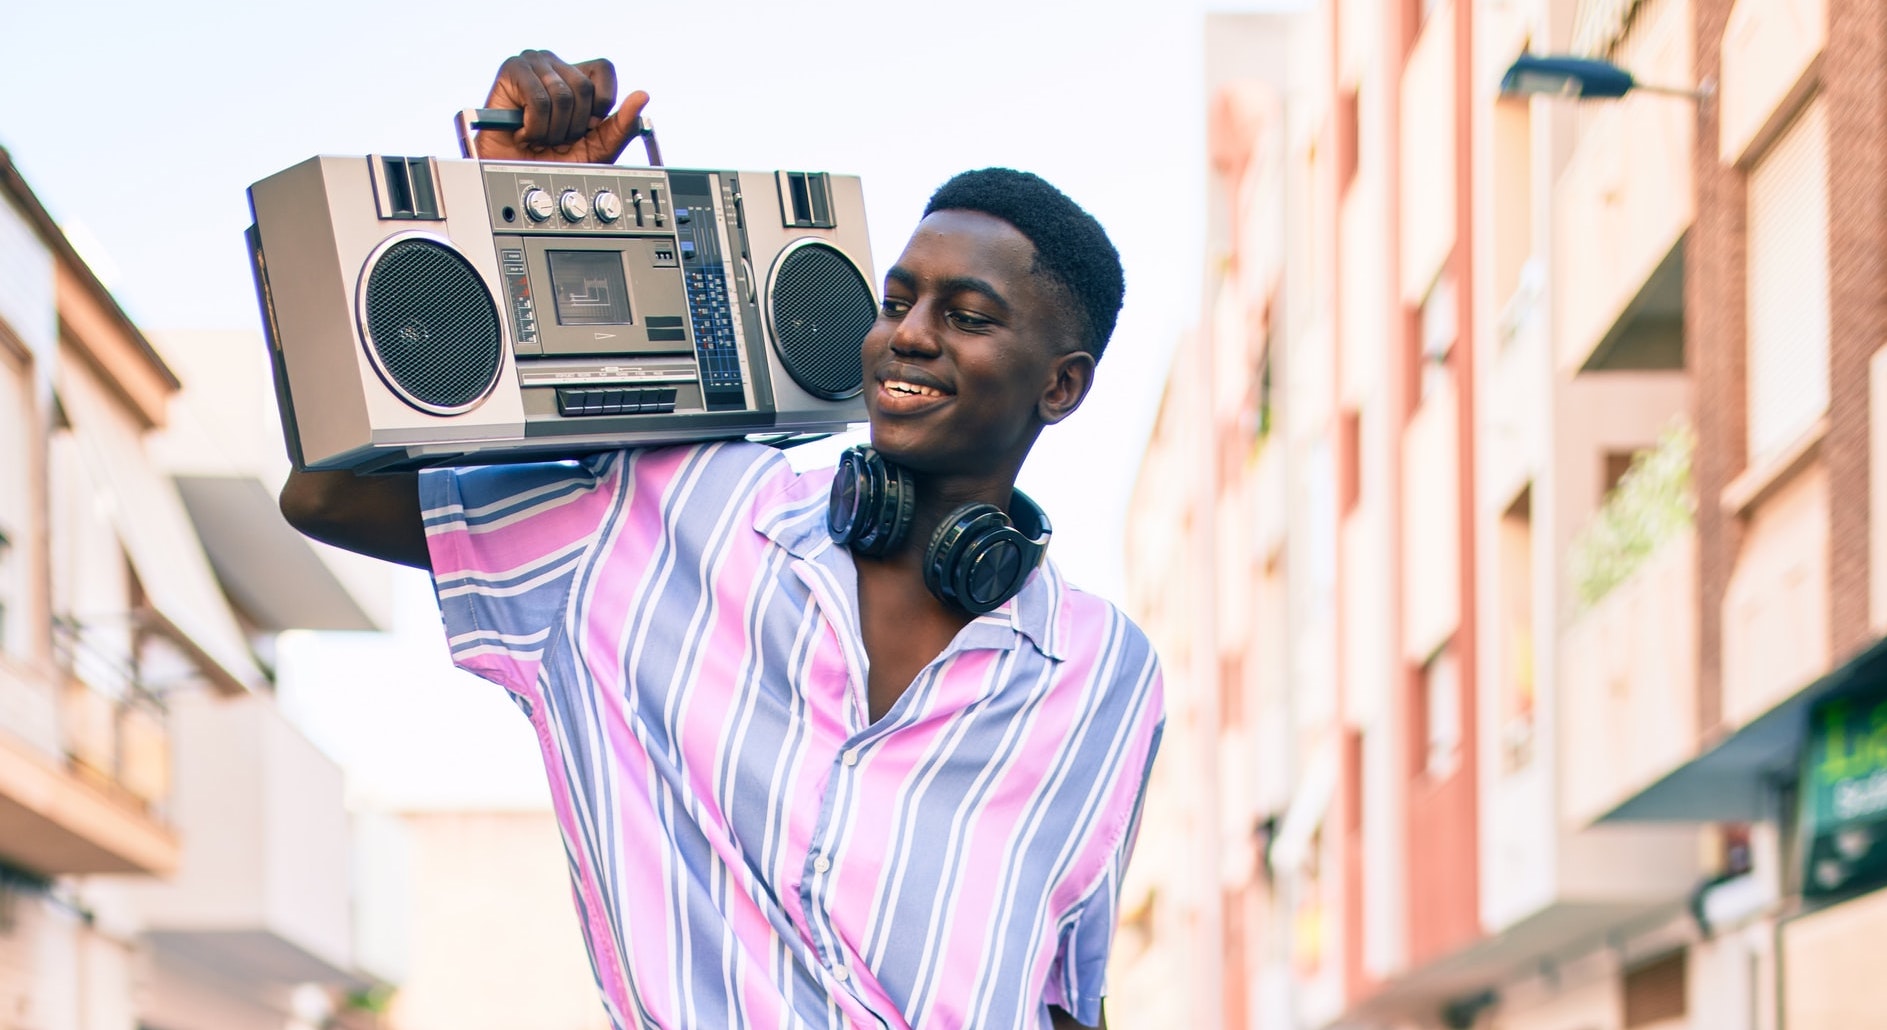 Black Man wearing romper smiles and holds large boom box on his shoulder